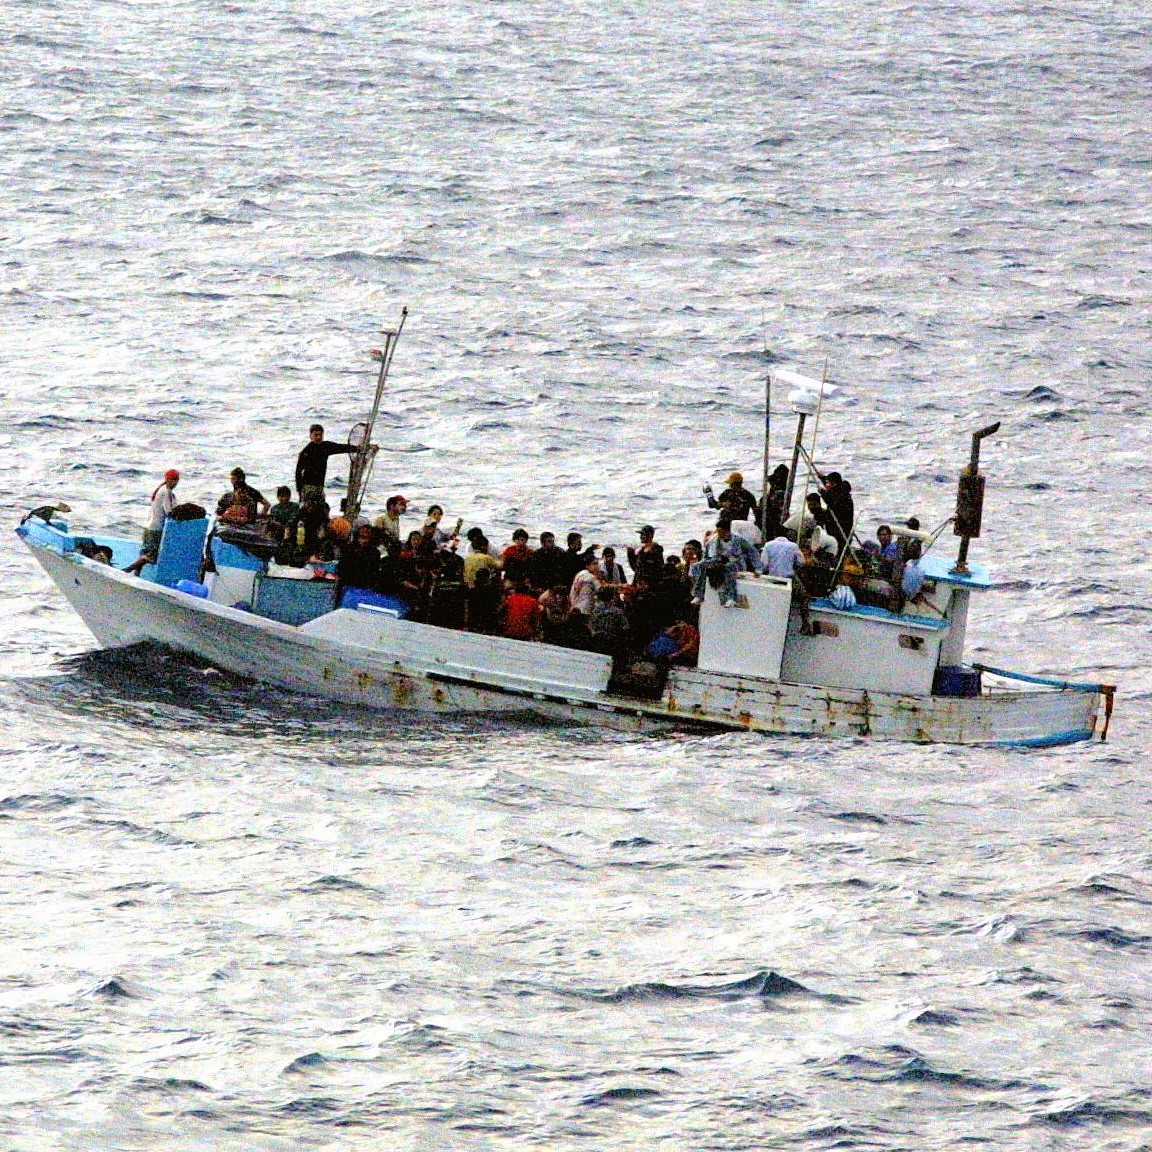 Trapped in despair: ‘The Great Escape’ in the Mediterranean